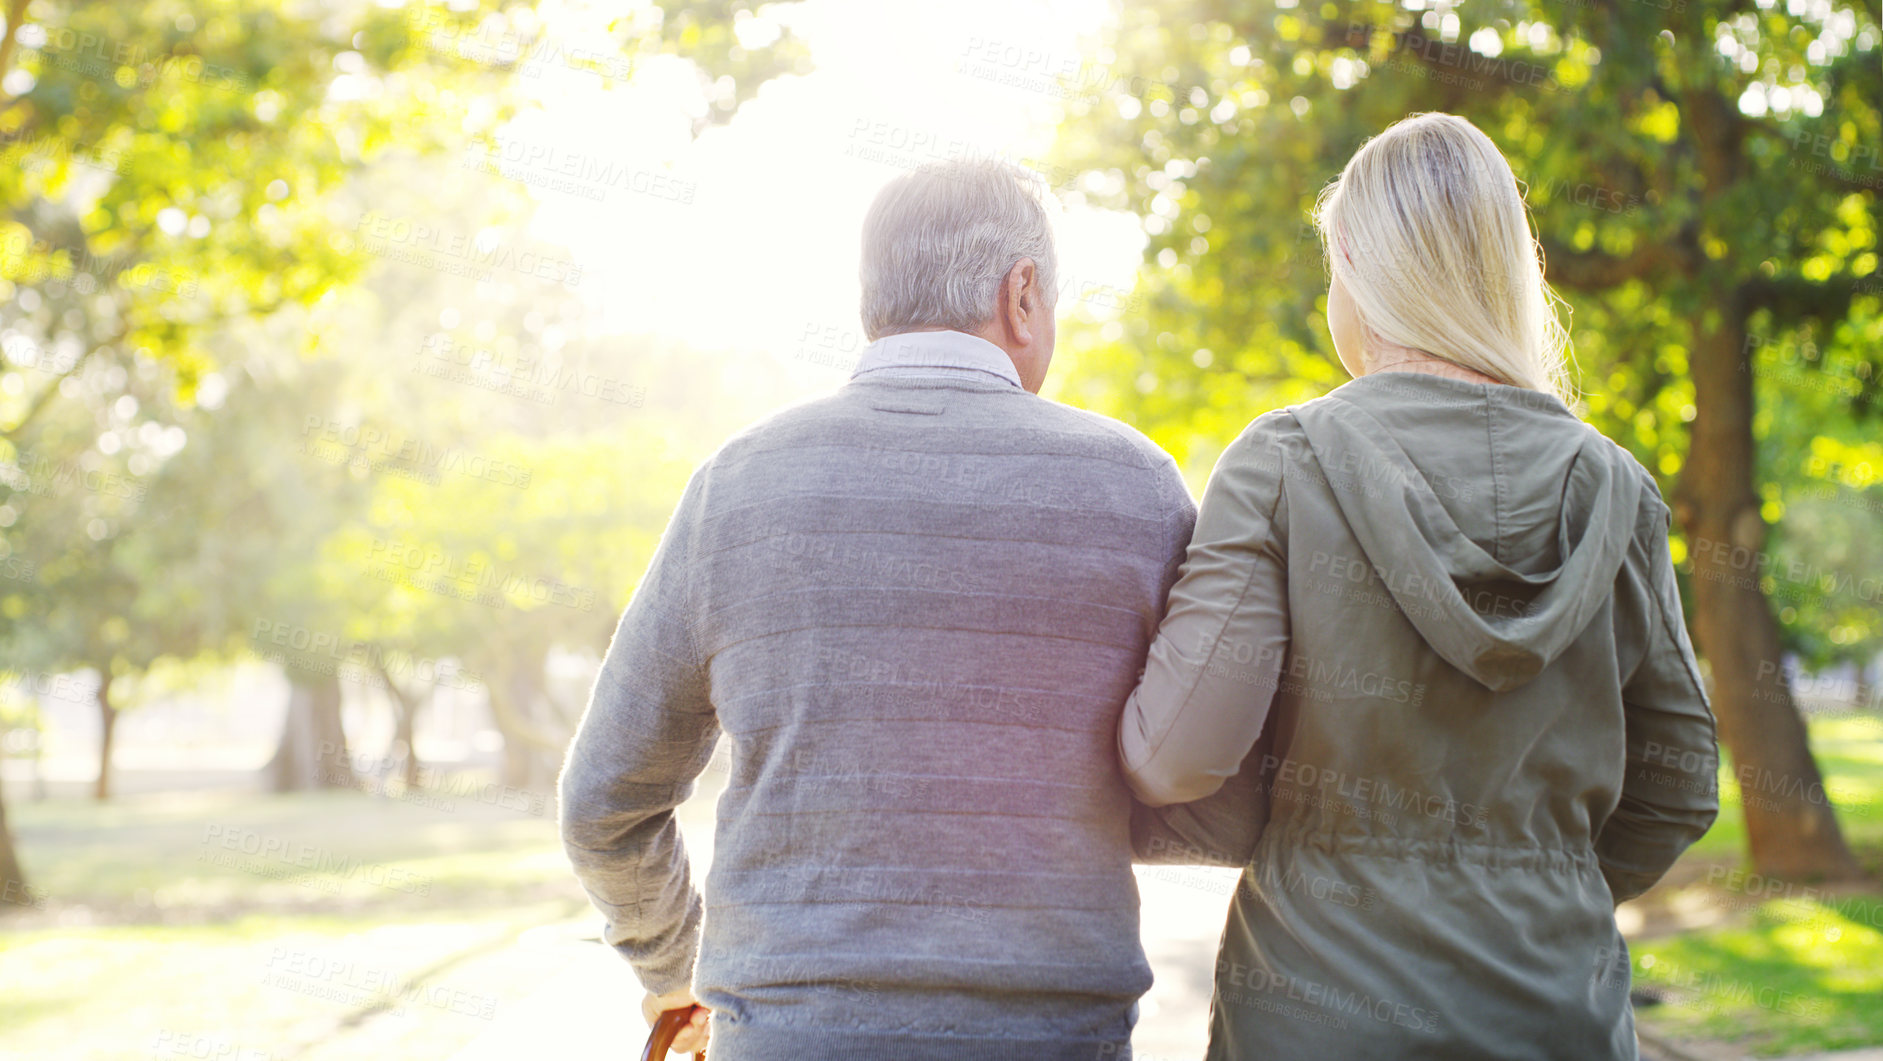 Buy stock photo Senior man, daughter and walking outdoor at a park with love, care and support for health and wellness. A elderly male and woman of family in nature for a walk, quality time and healthy retirement